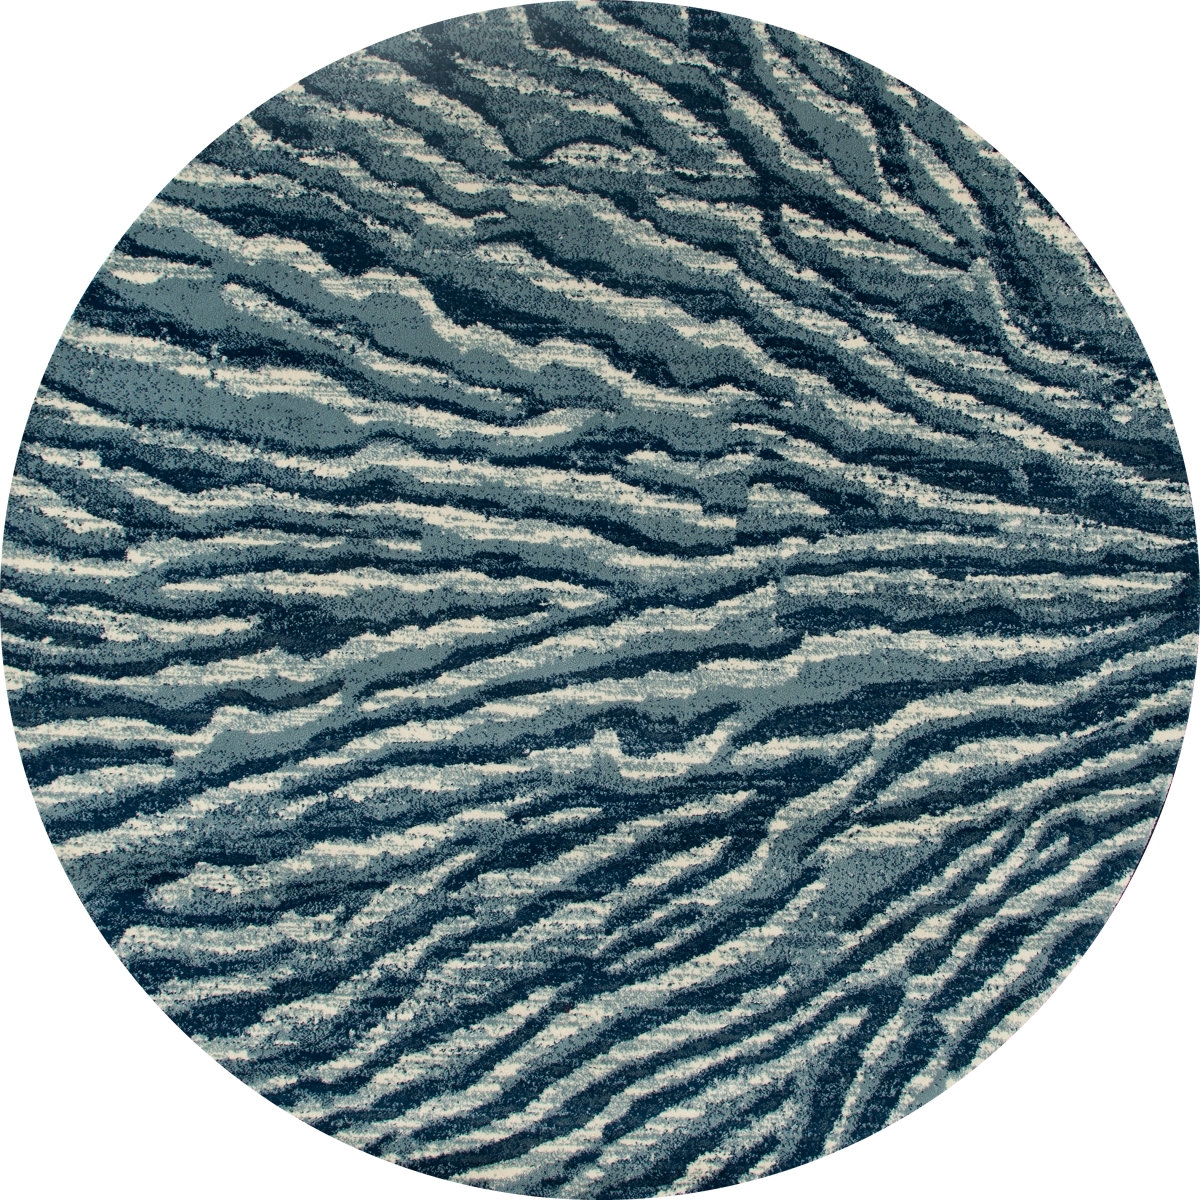 25900 8 Ft. Troy Collection Ripple Woven Round Area Rug, Blue